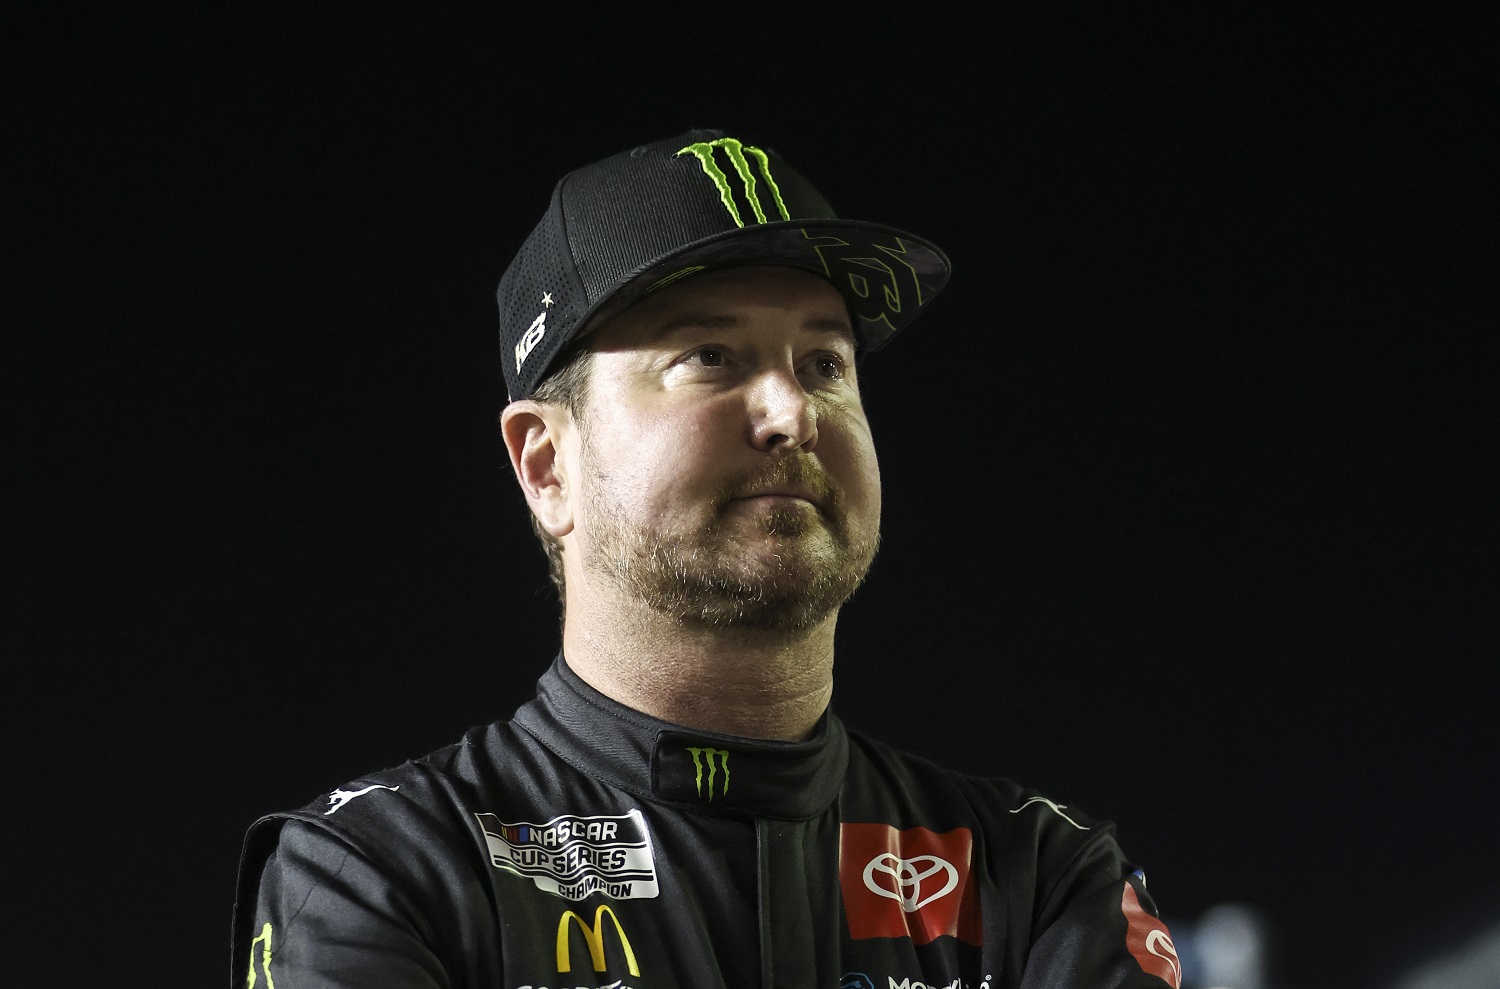 Kurt Busch, driver of the No. 45 Toyota, waits on pit lane during qualifying for the NASCAR Cup Series Daytona 500 on Feb. 16, 2022.